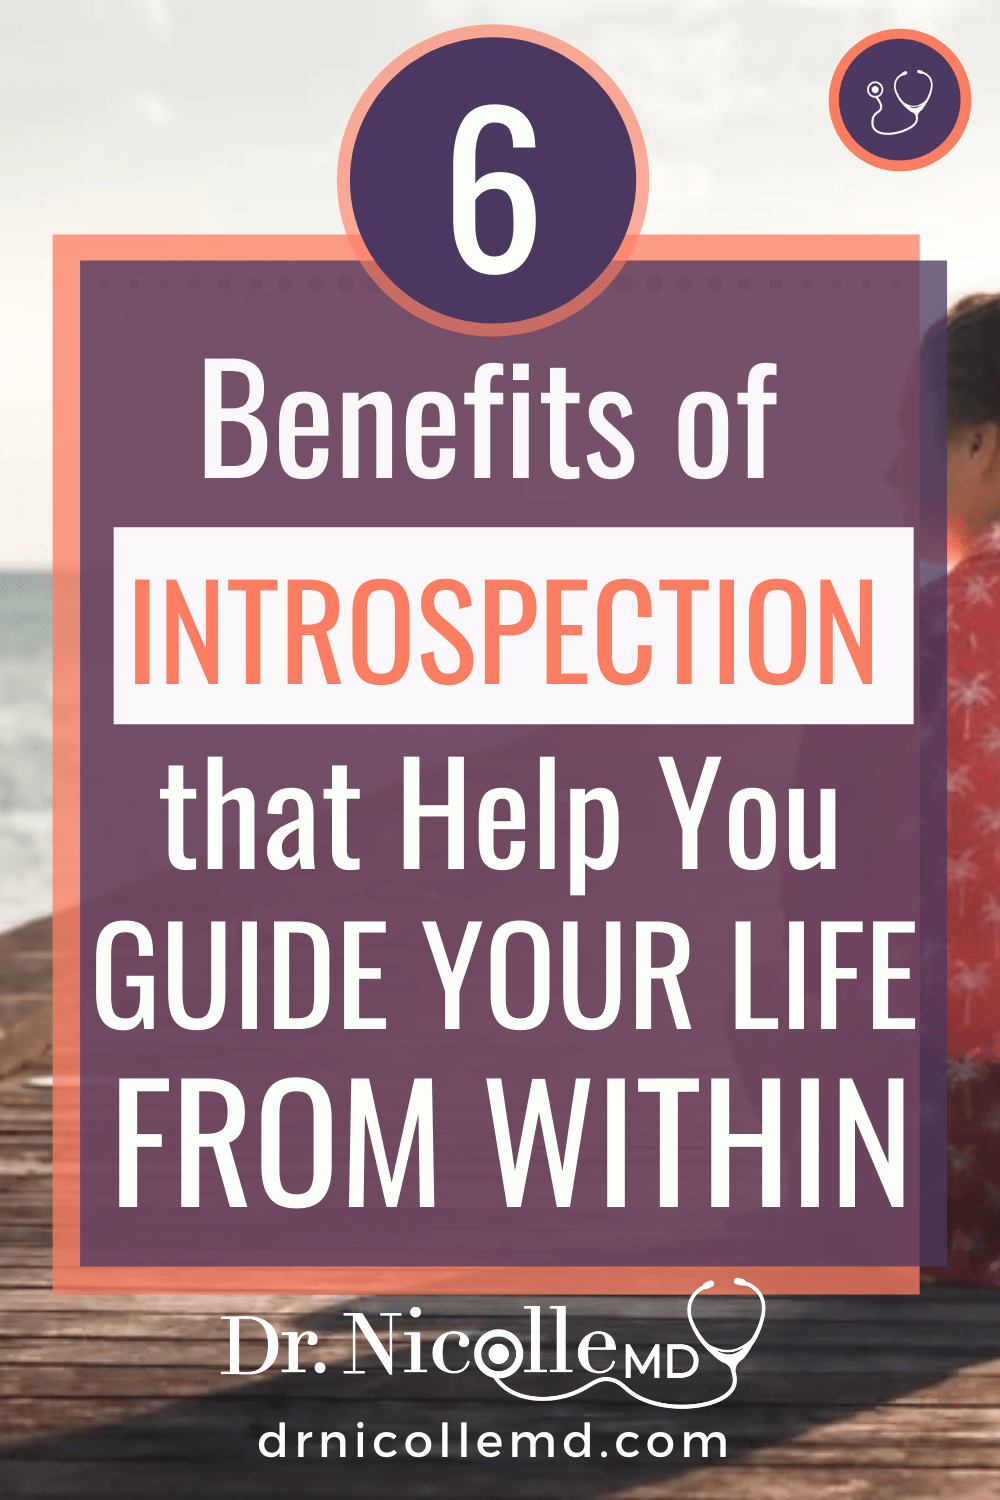 6 Benefits of Introspection that Help You Guide Your Life From Within